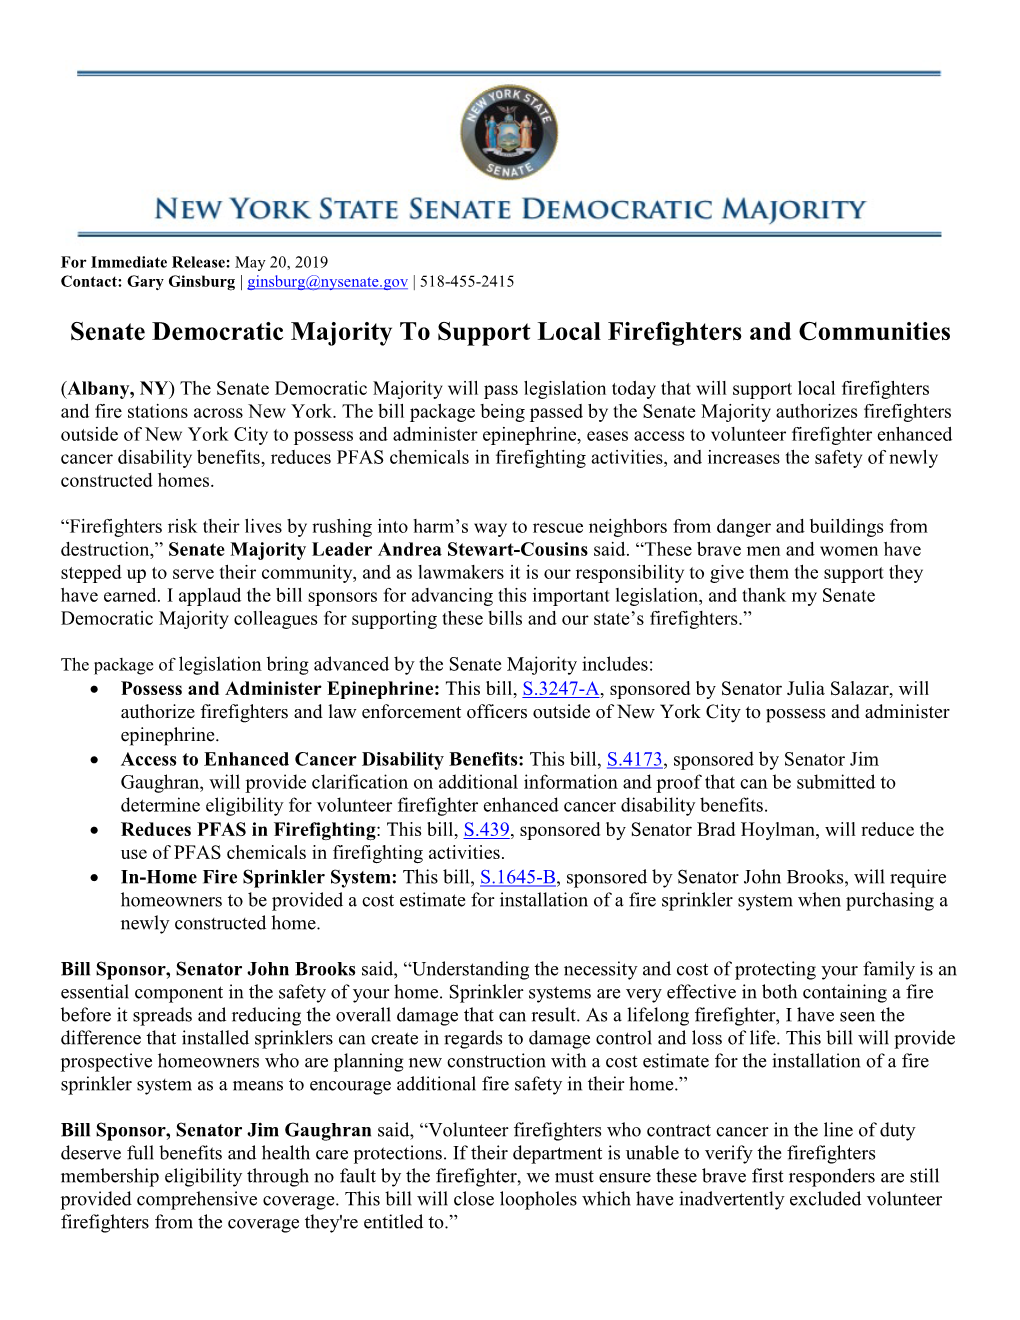 Senate Democratic Majority to Support Local Firefighters and Communities